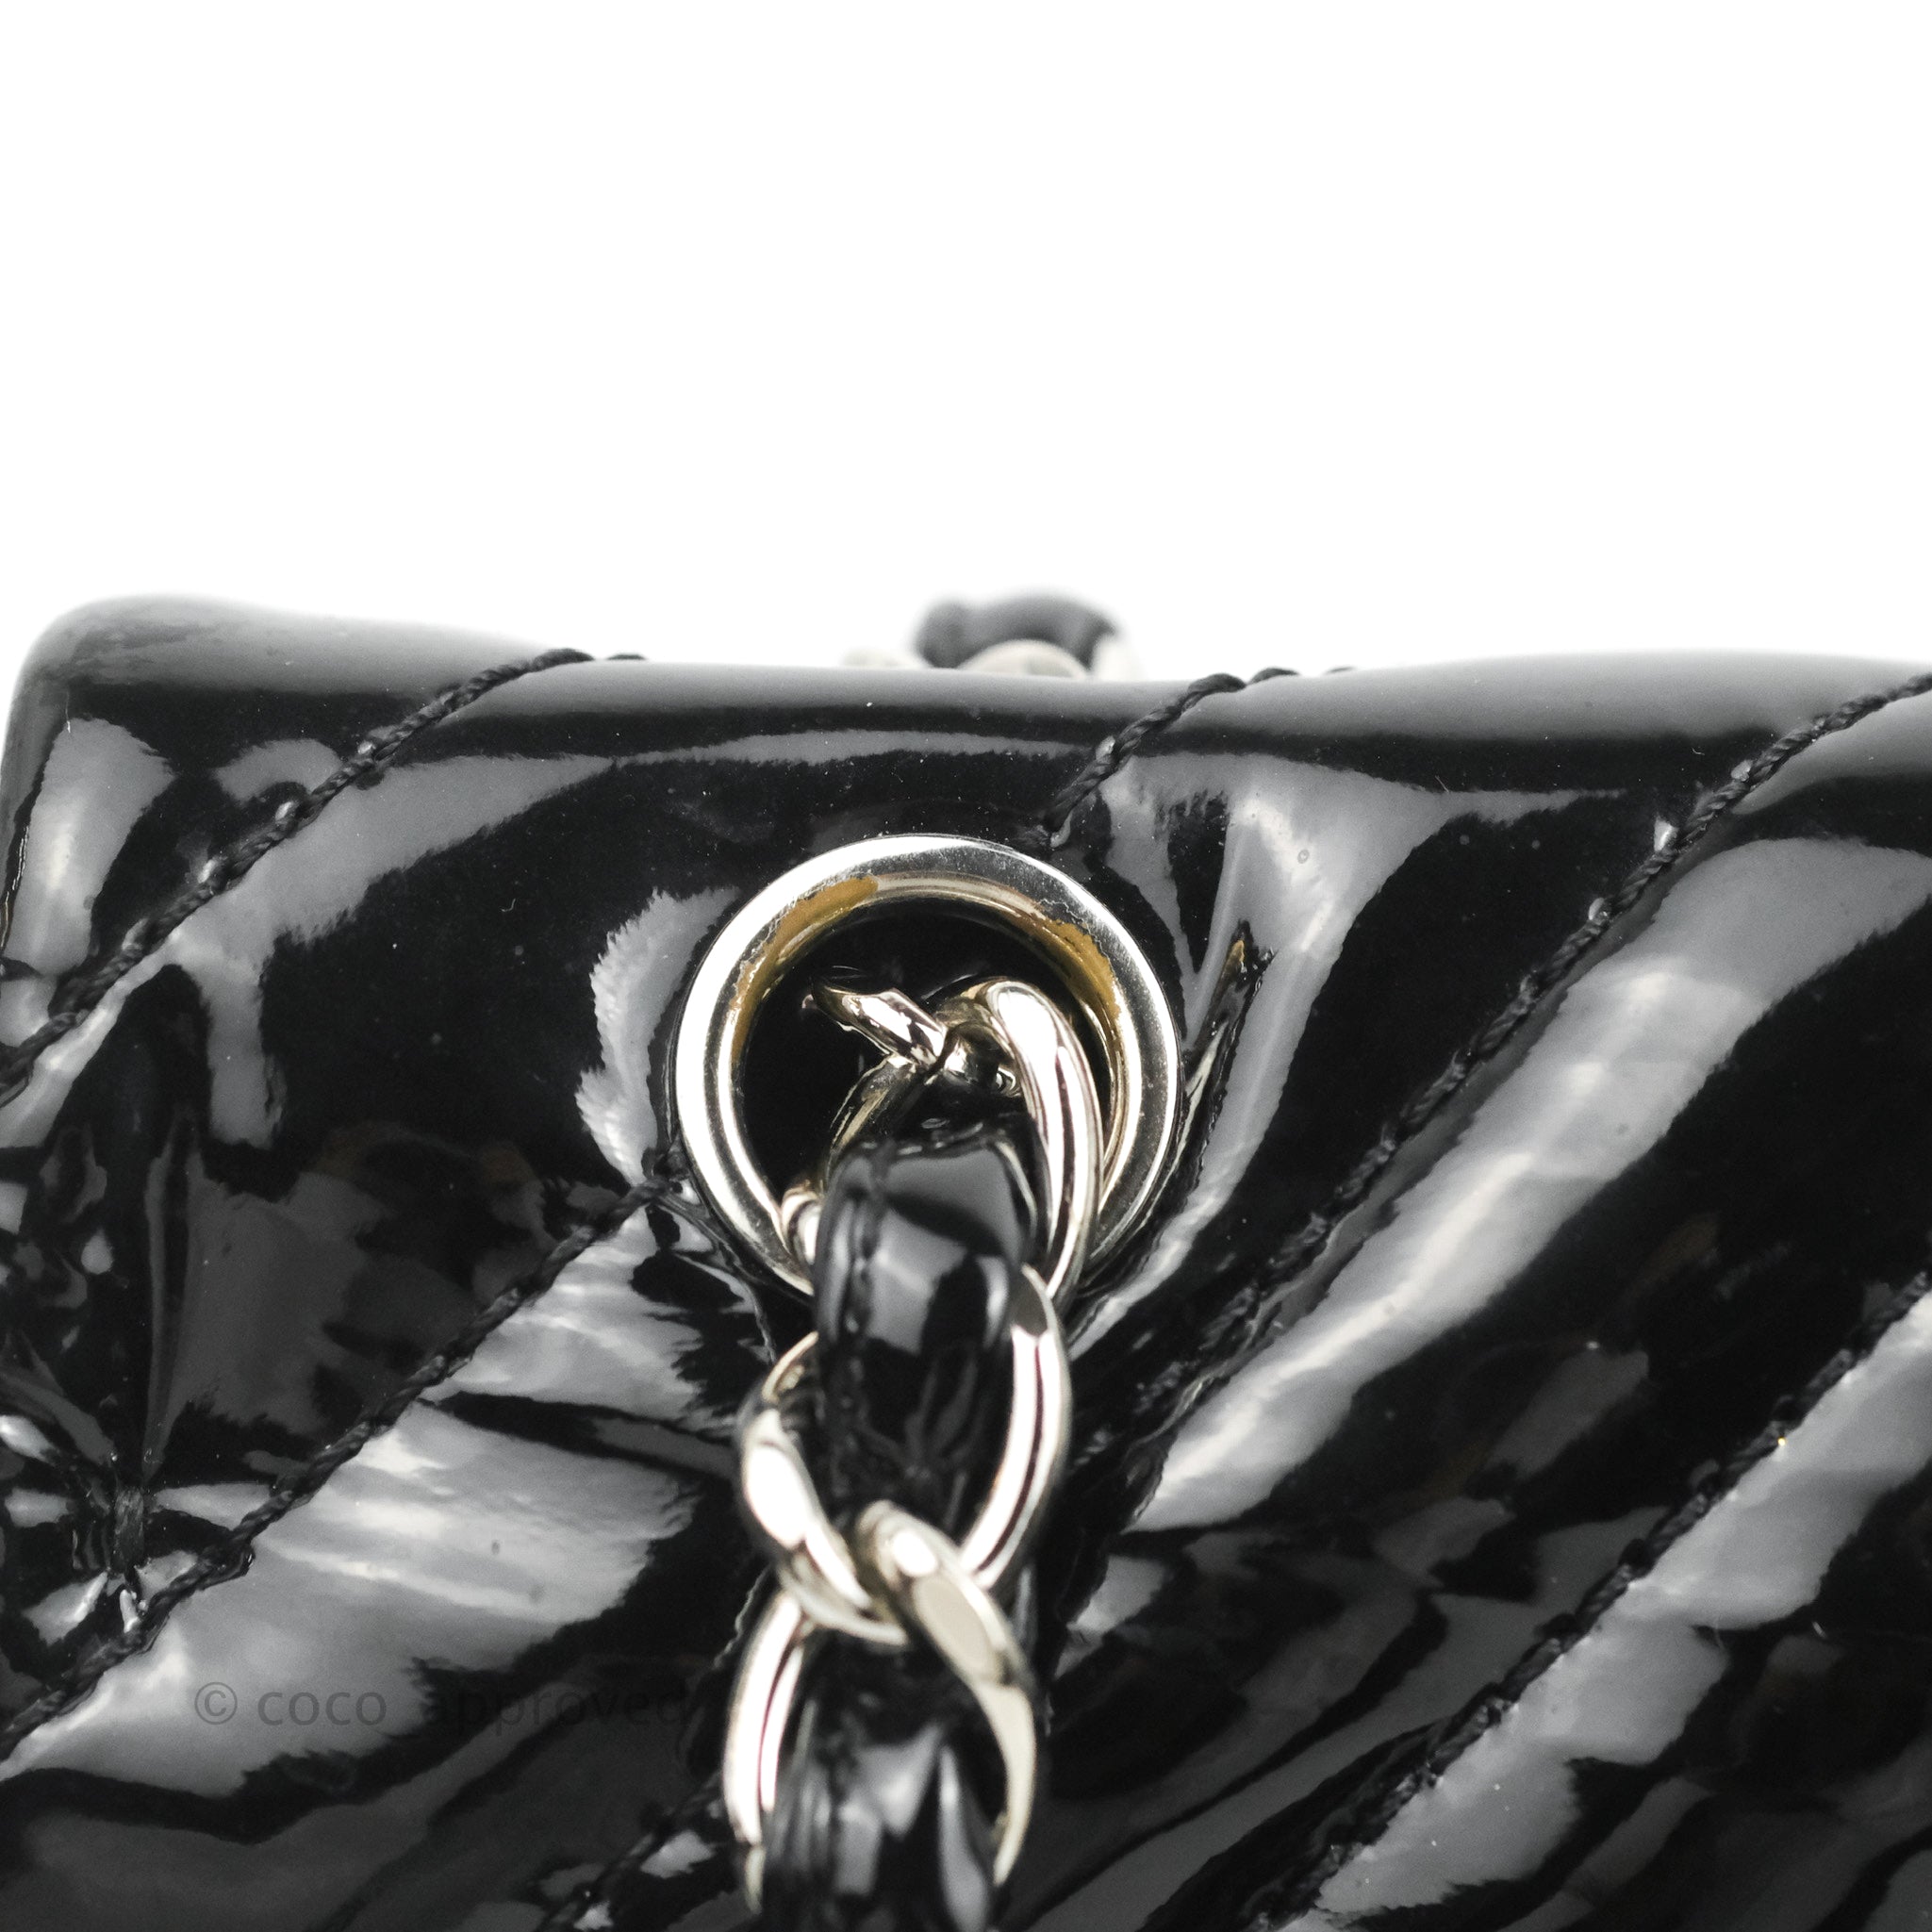 Chanel Classic Single Flap Quilted Patent Leather Silver-tone Maxi